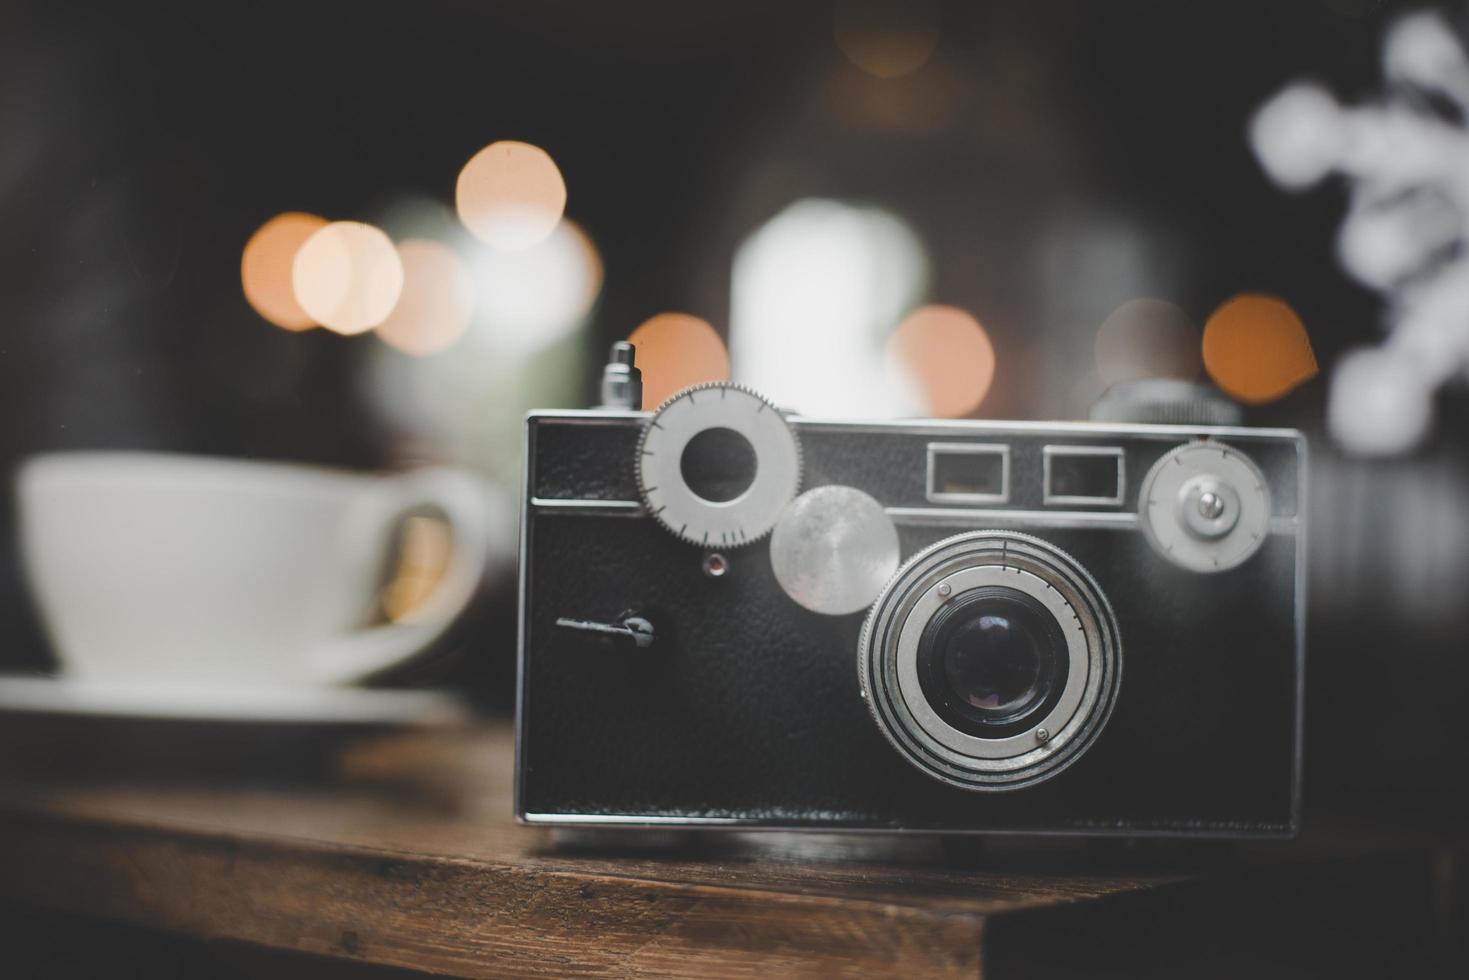 Vintage or retro camera on a wooden table at a cafe photo